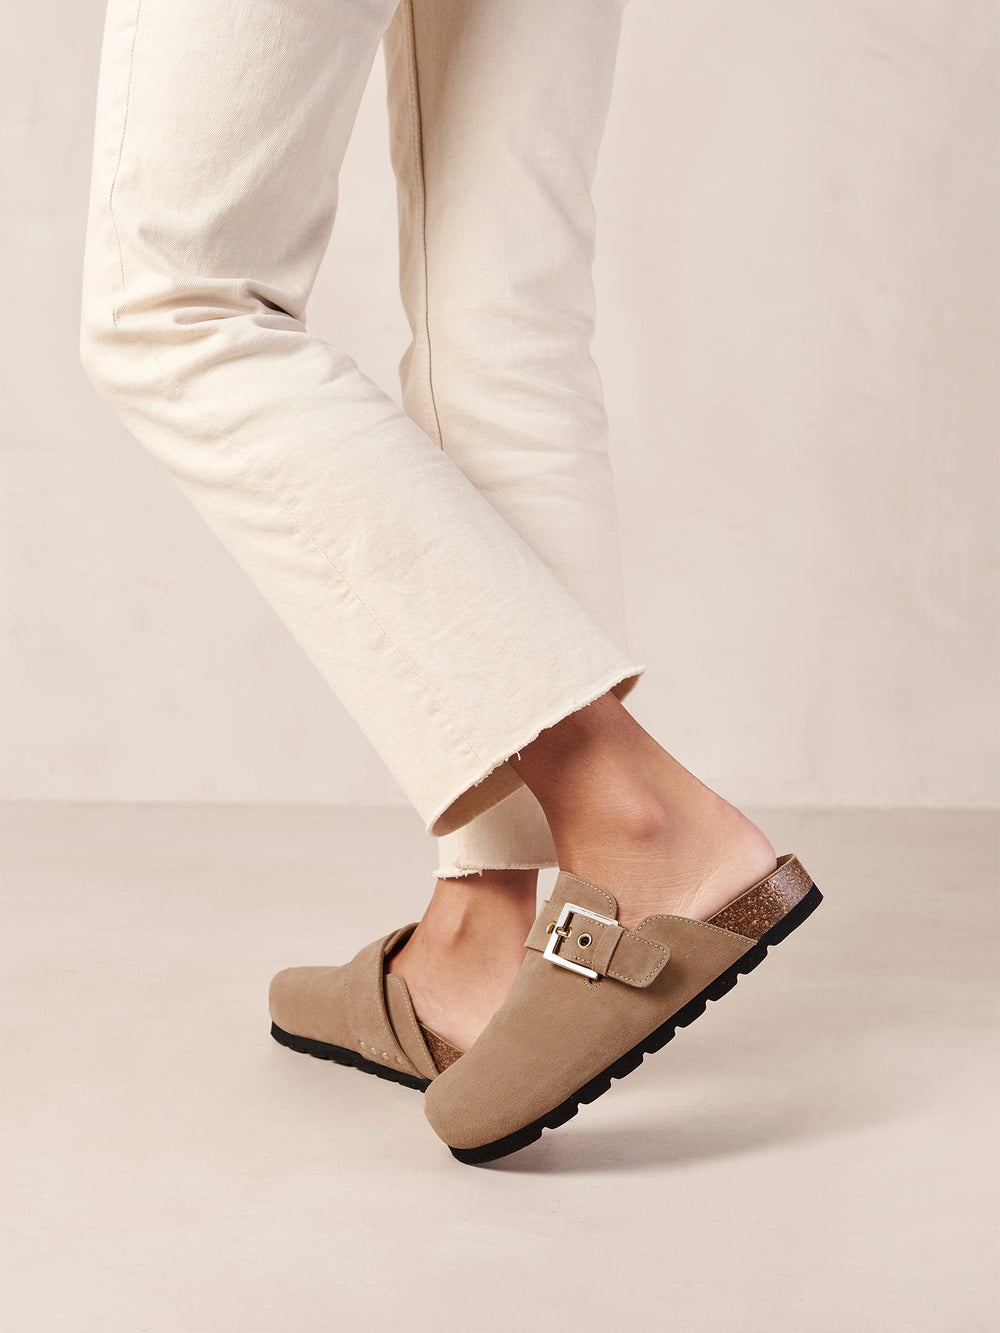 Alohas Cozy Suede Clogs in Taupe